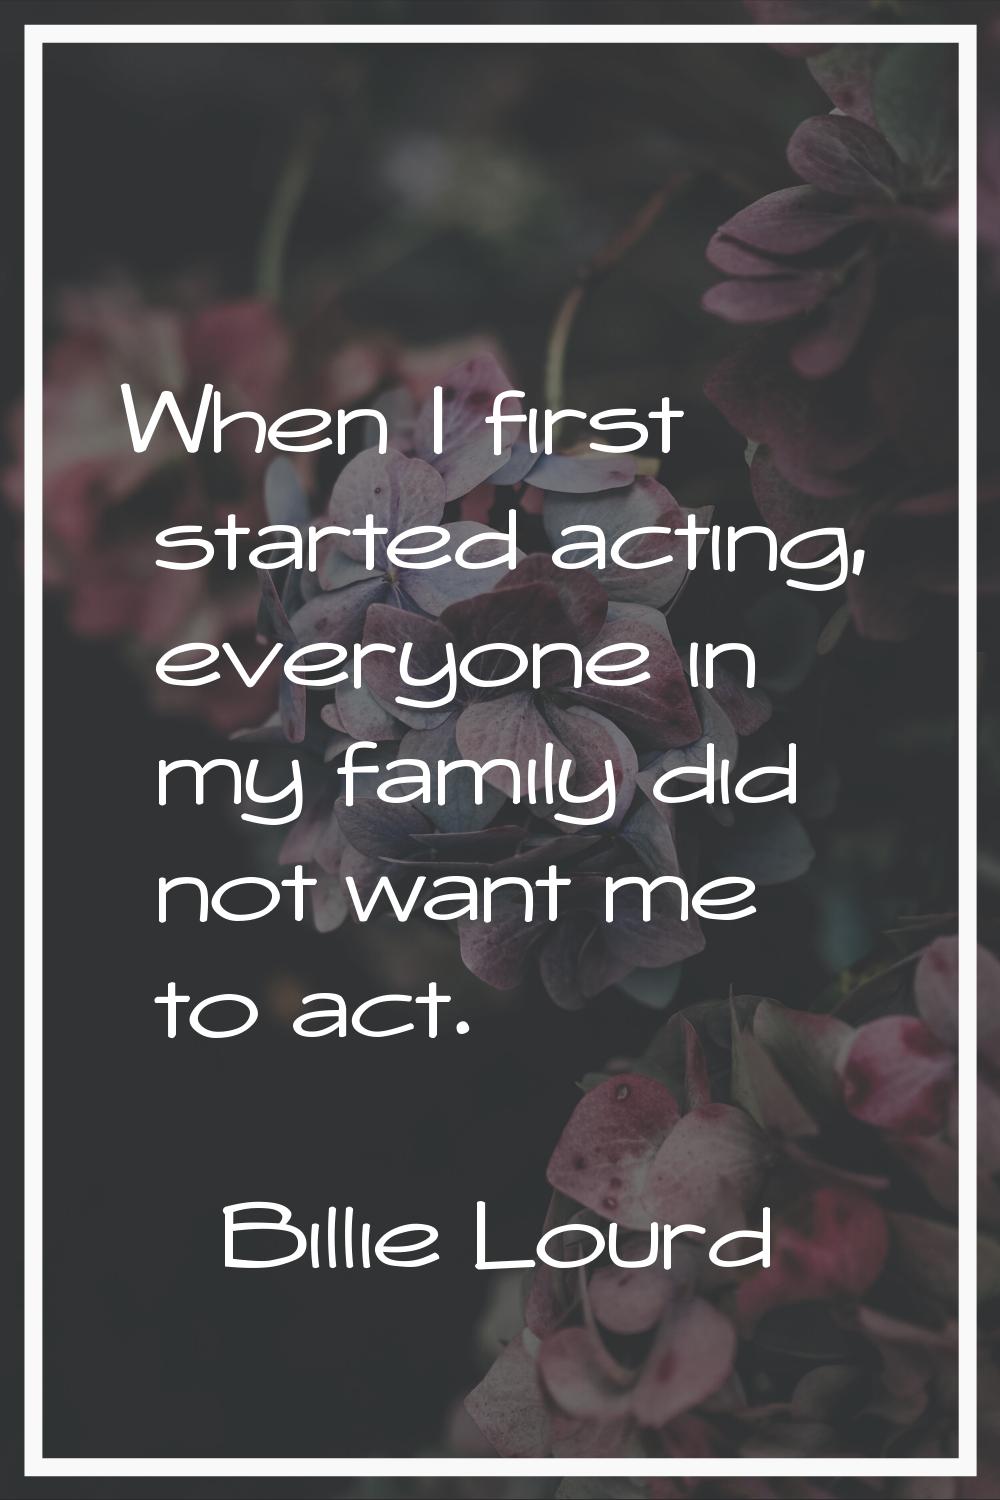 When I first started acting, everyone in my family did not want me to act.